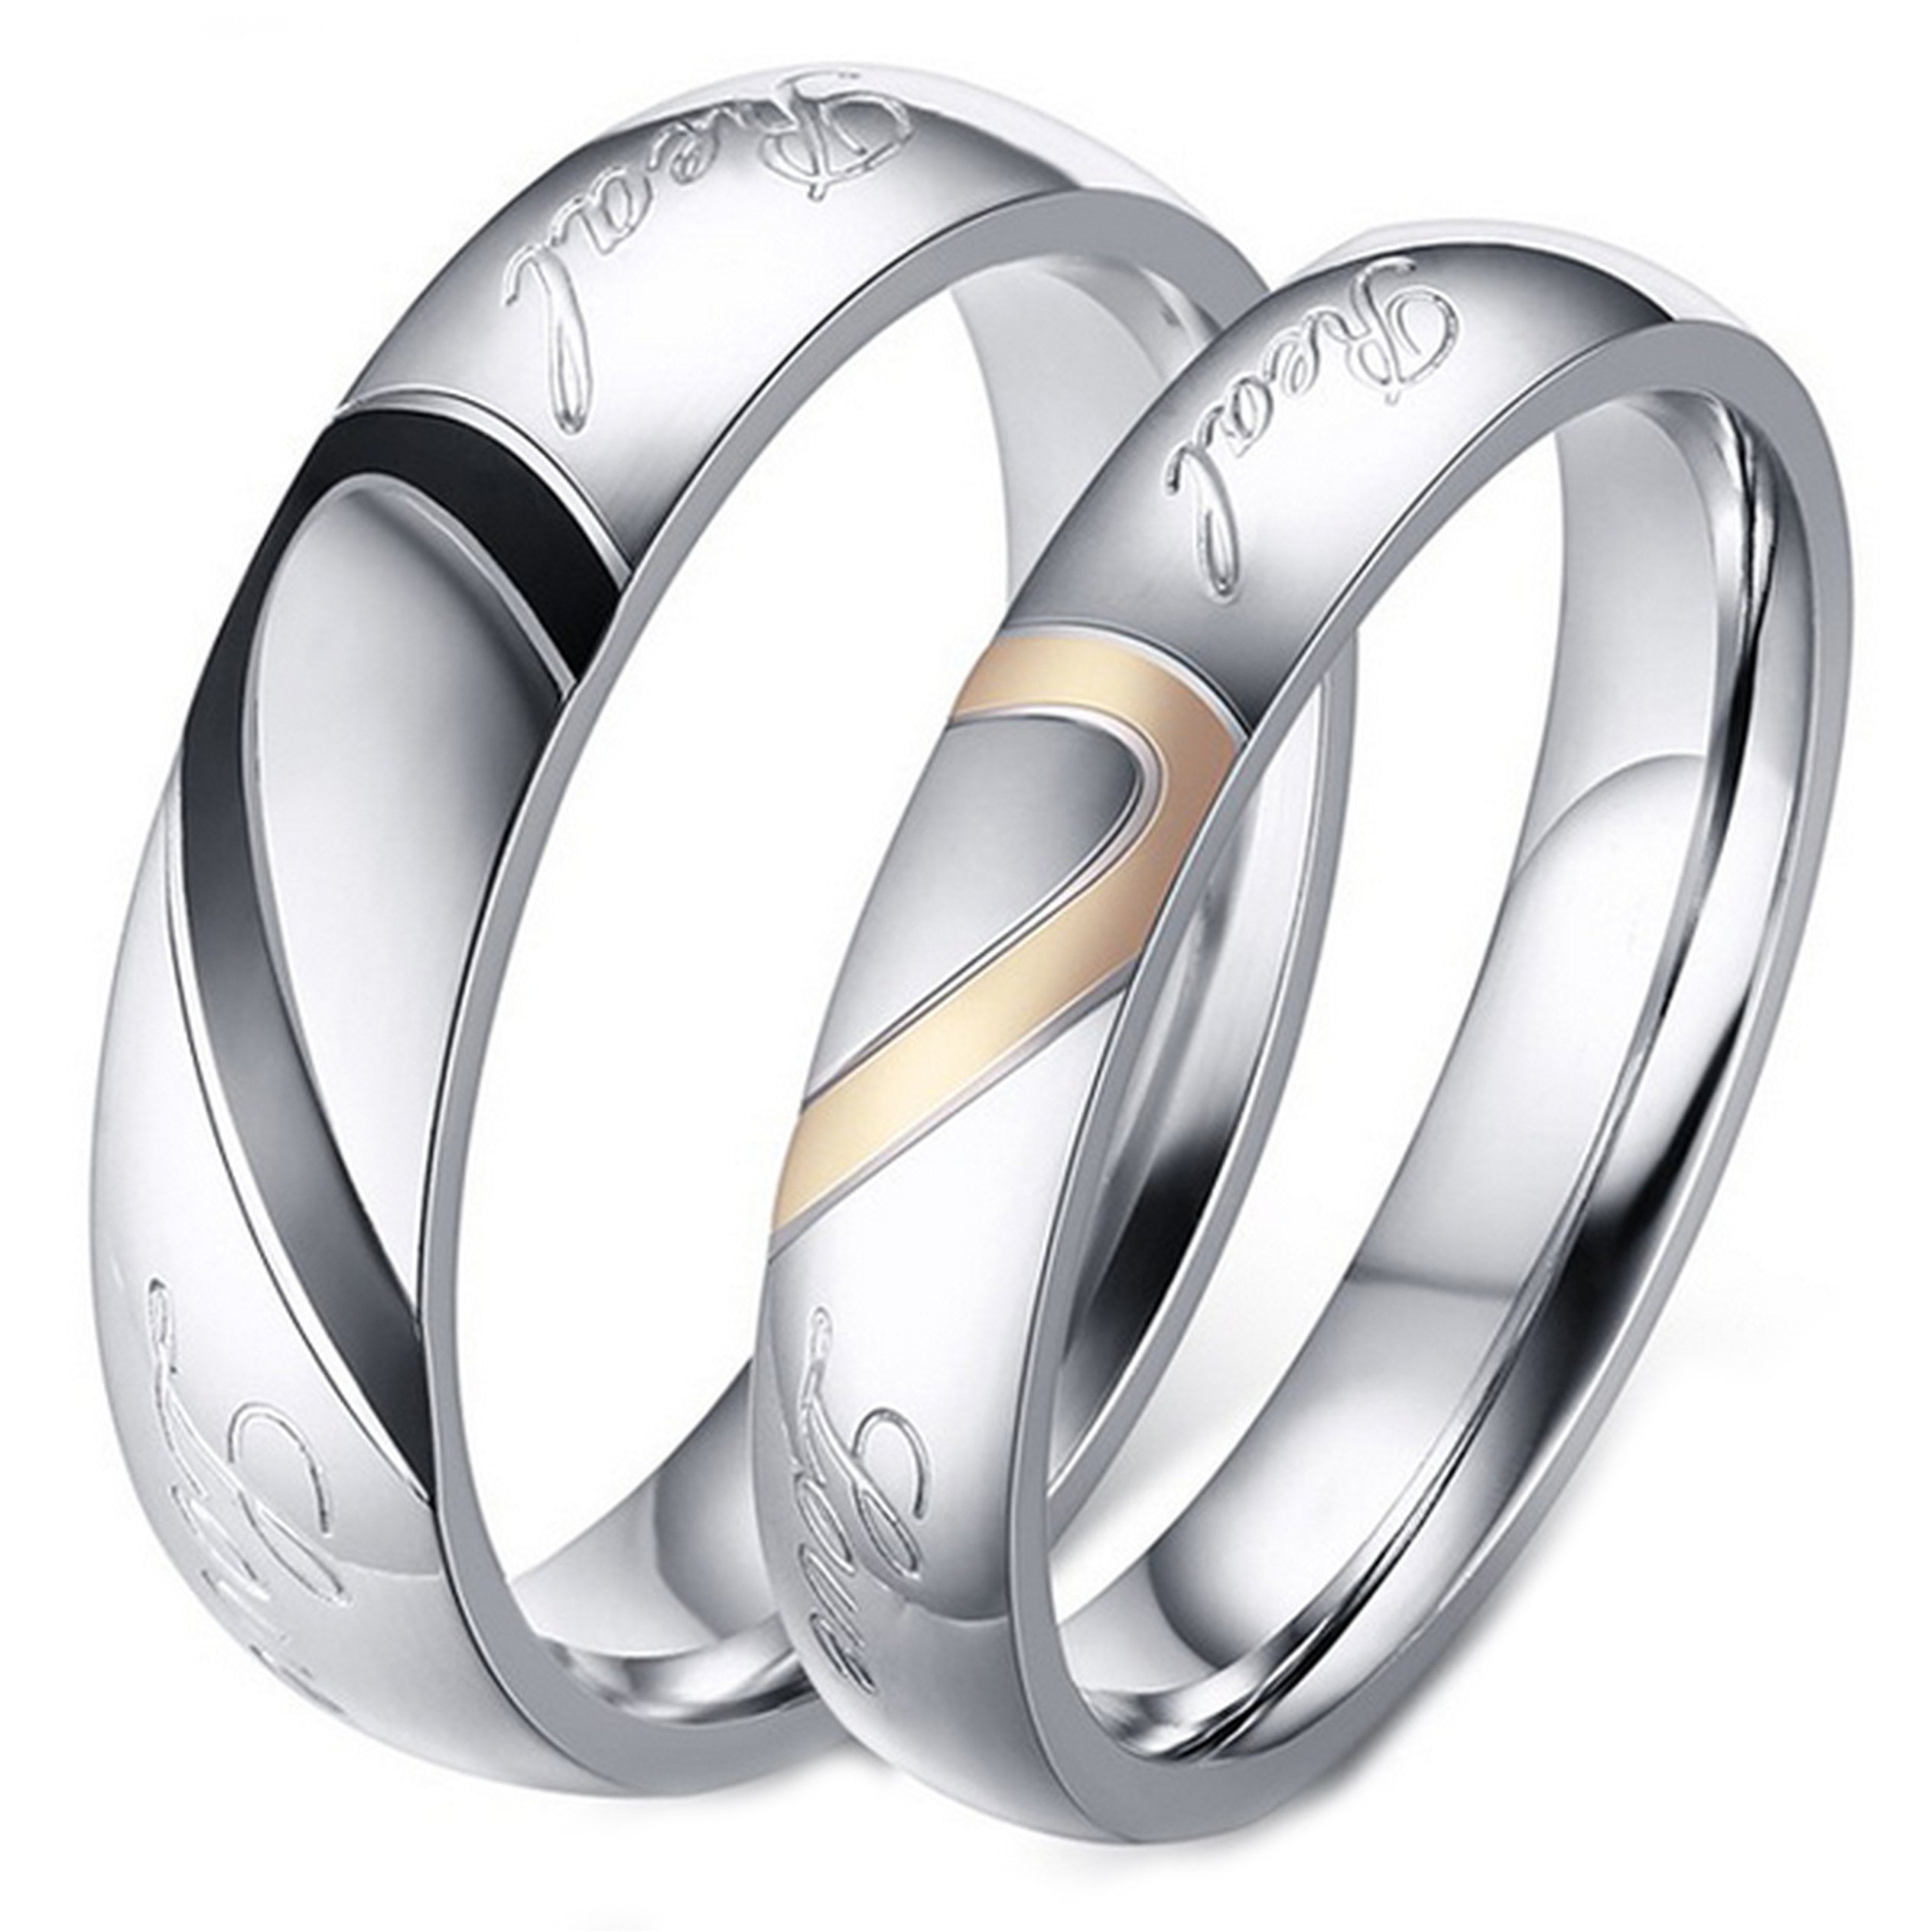 Stainless Steel " Real Love " Heart Couples Promise Engagement Ring Wedding Band 